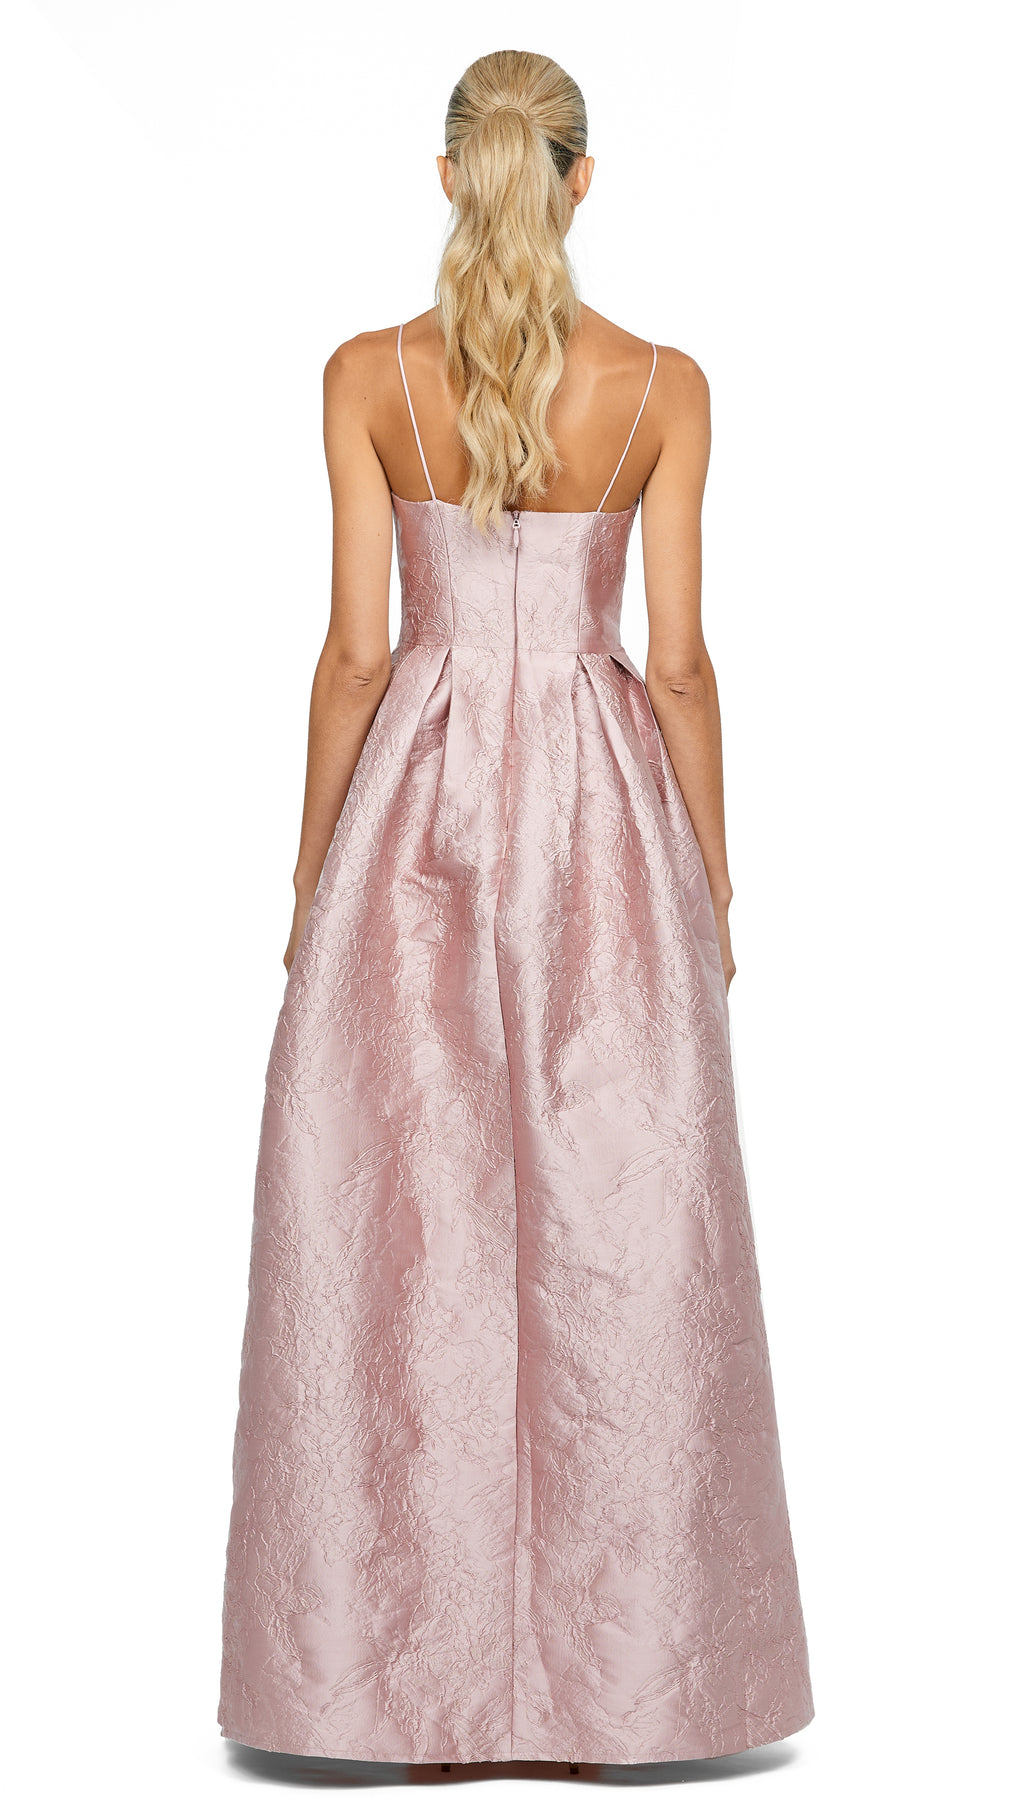 Balmy Nights Scoop Ball Gown in Blush/Gold back